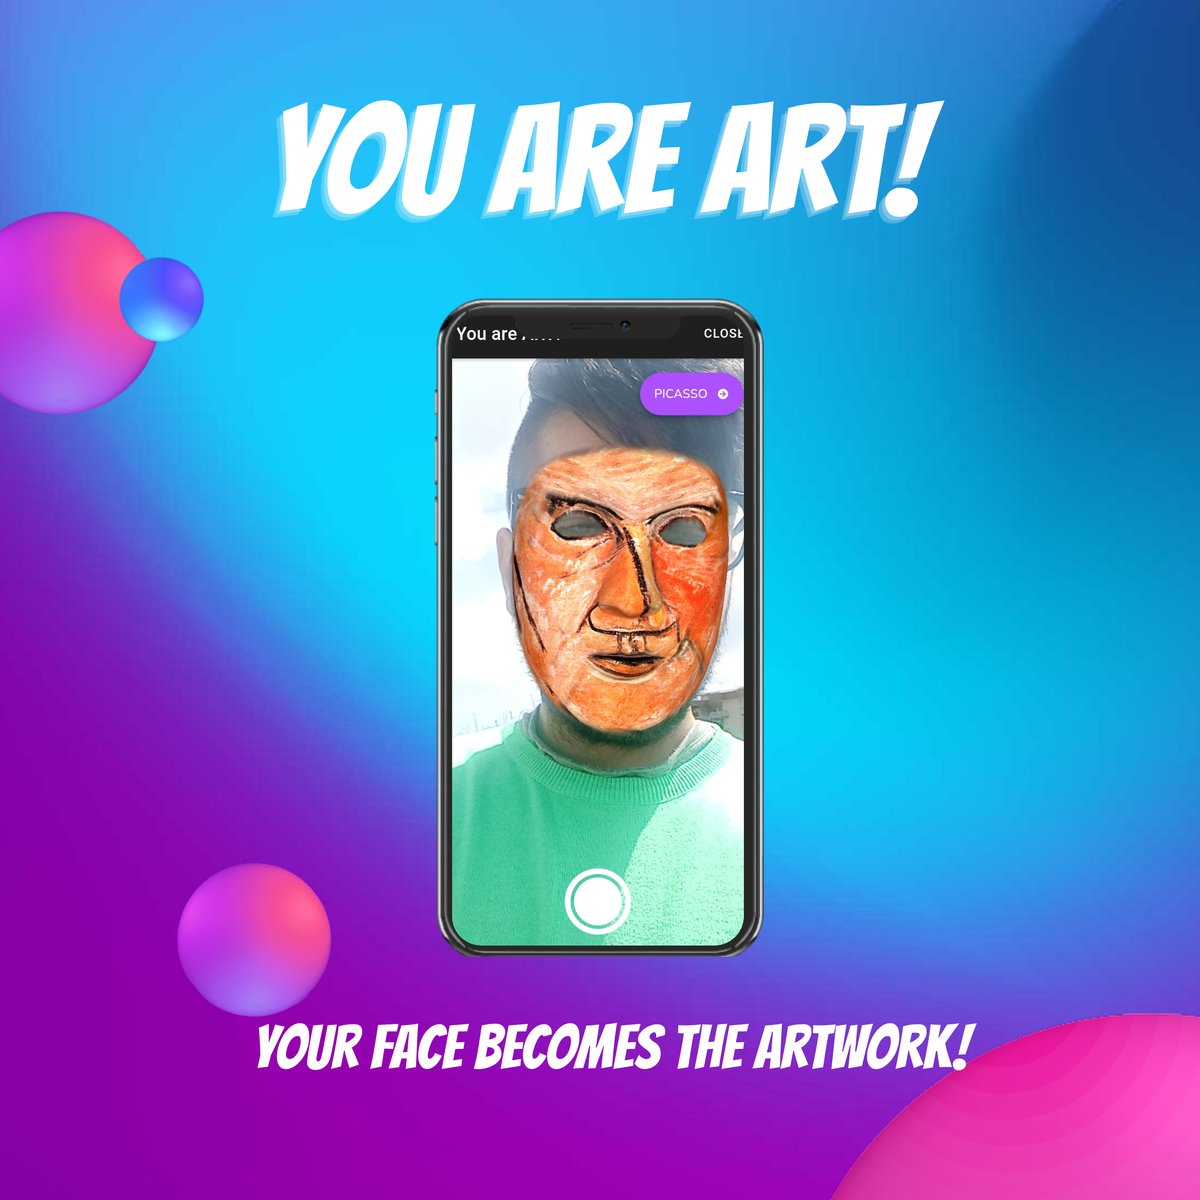 You are ART!👩‍🎨

You can now wear #3Dmodel masks of famous artists like Van Gogh, Picasso, and Khalo, and bring their art to life. Feel like a true artist yourself🎨#famousartists #3Dmodelmasks #immersivetechnology

📱Sgozz app bit.ly/sgozz-twitter